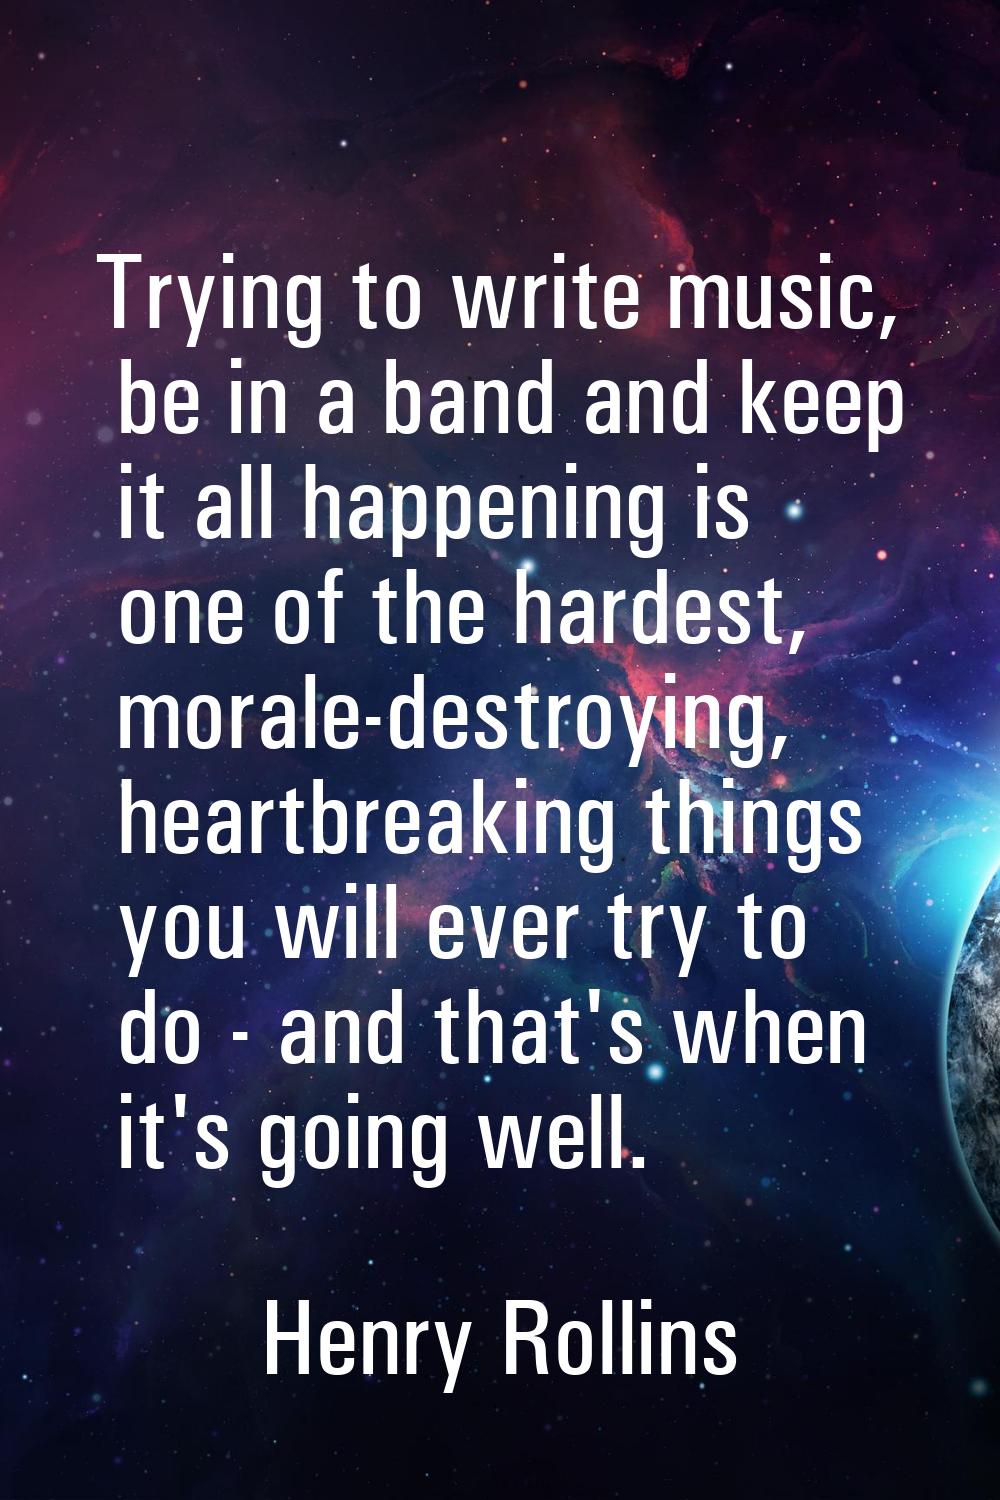 Trying to write music, be in a band and keep it all happening is one of the hardest, morale-destroy